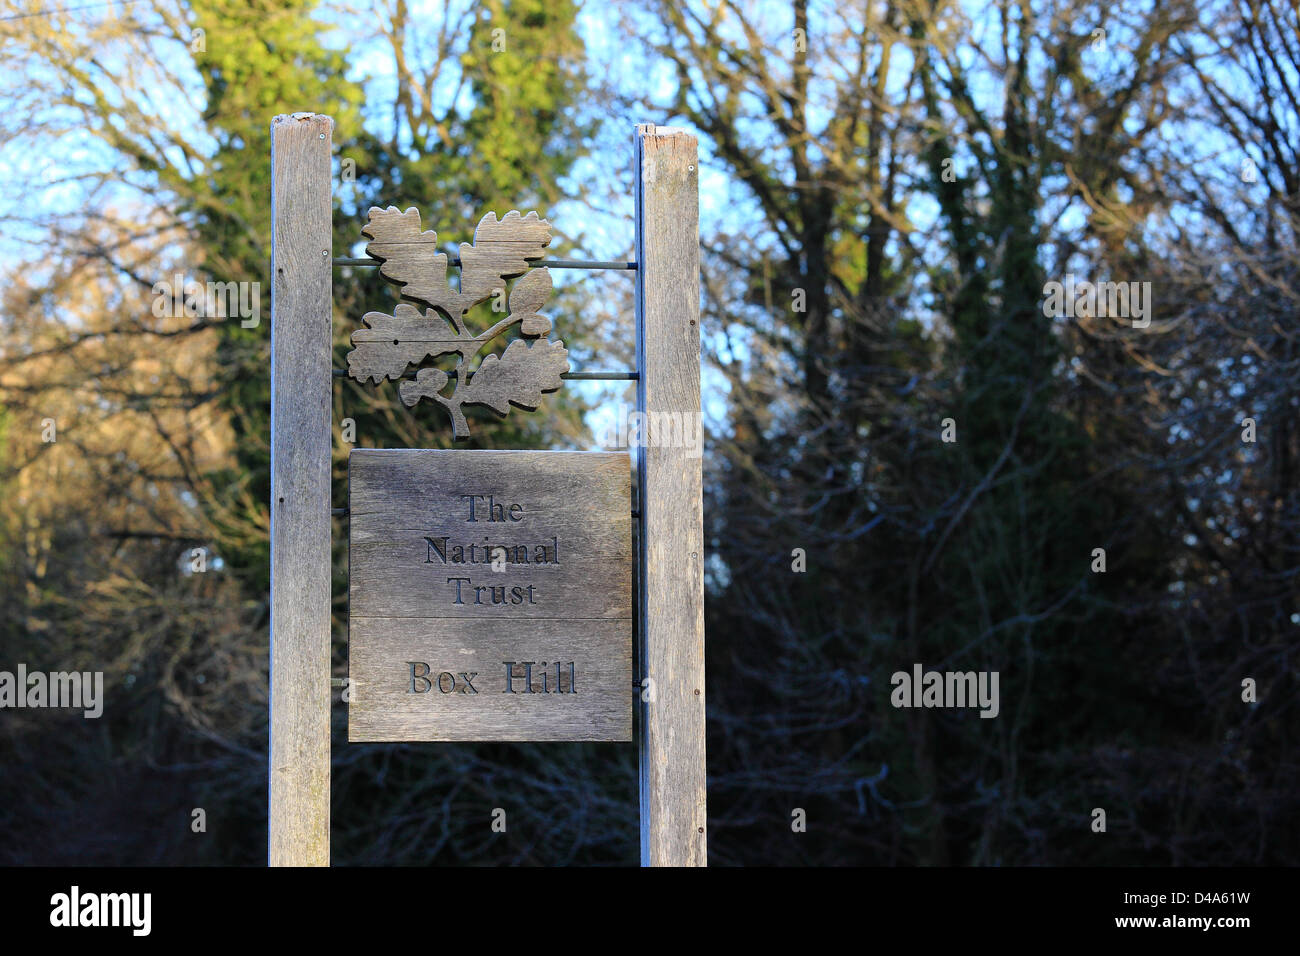 Il National Trust Box Hill sign in il gelo invernale, Inghilterra Foto Stock